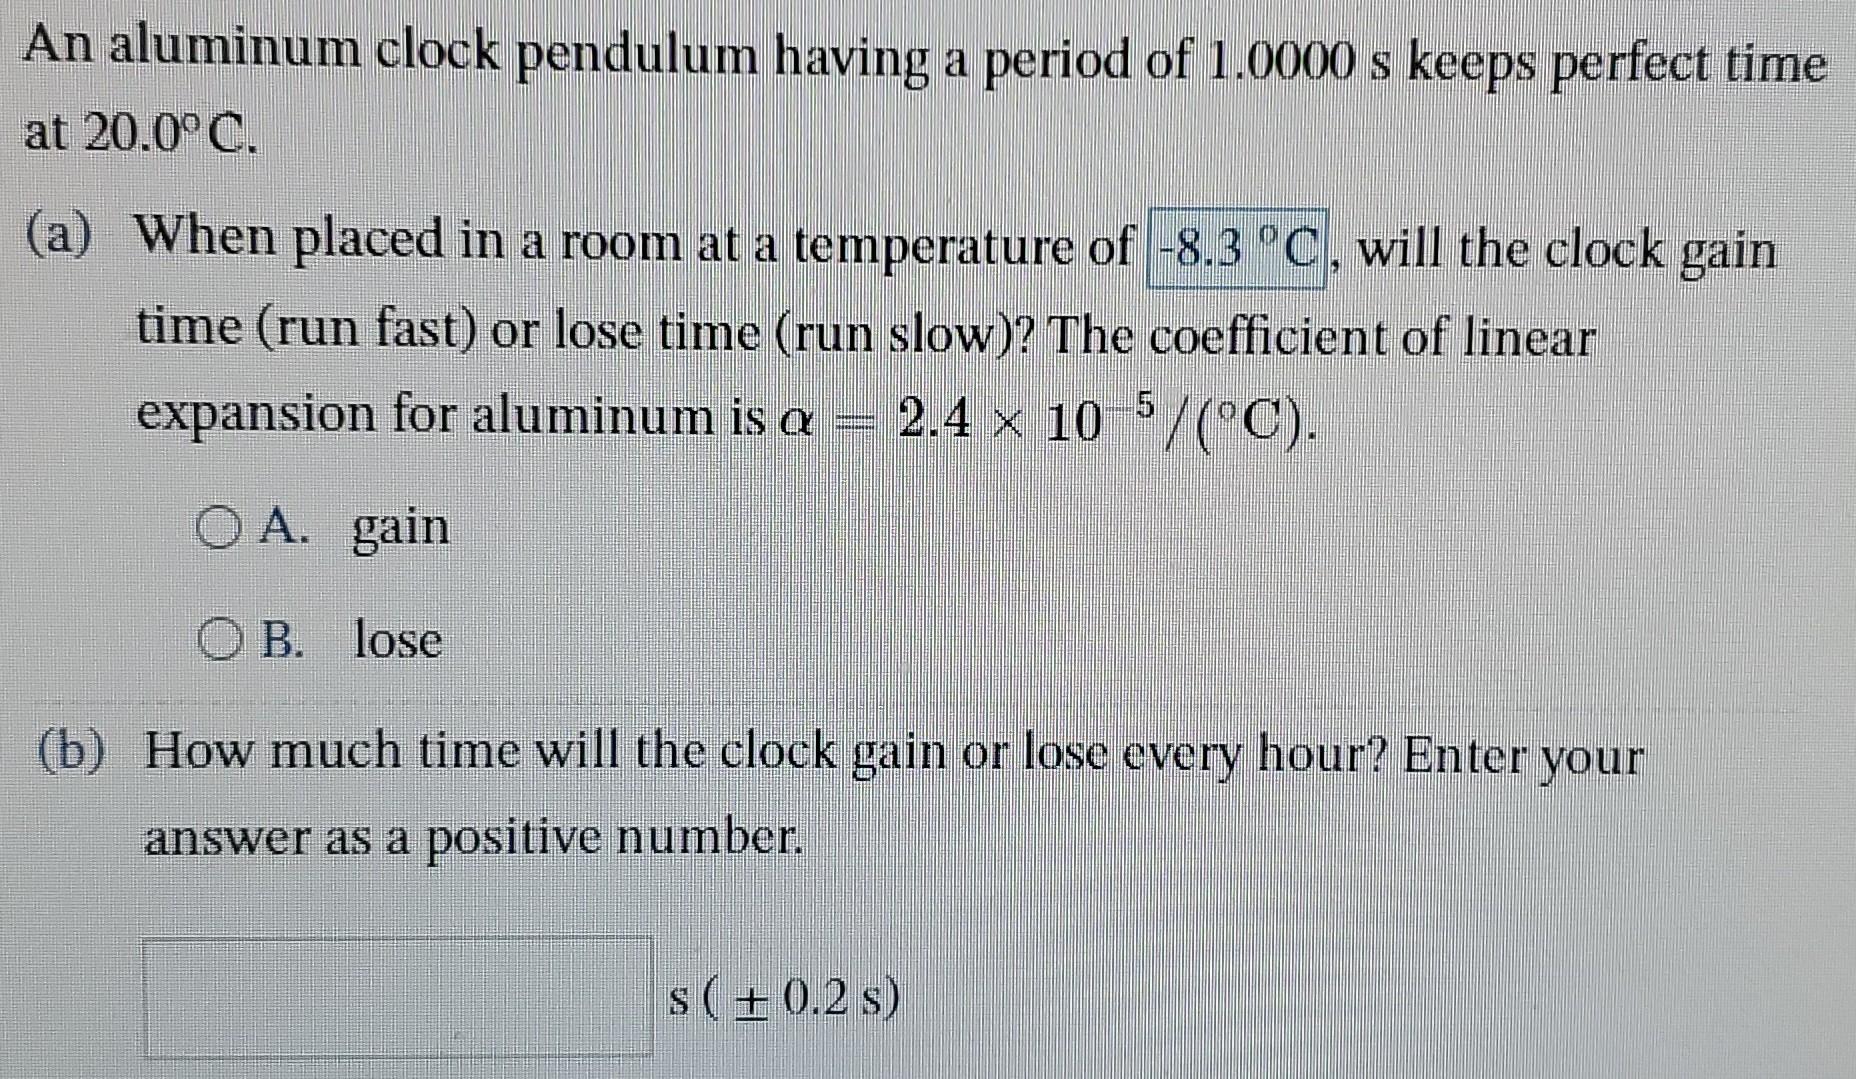 An aluminum clock pendulum having a period of 1.0000 s keeps perfect time at 20.0C. (a) When placed in a room